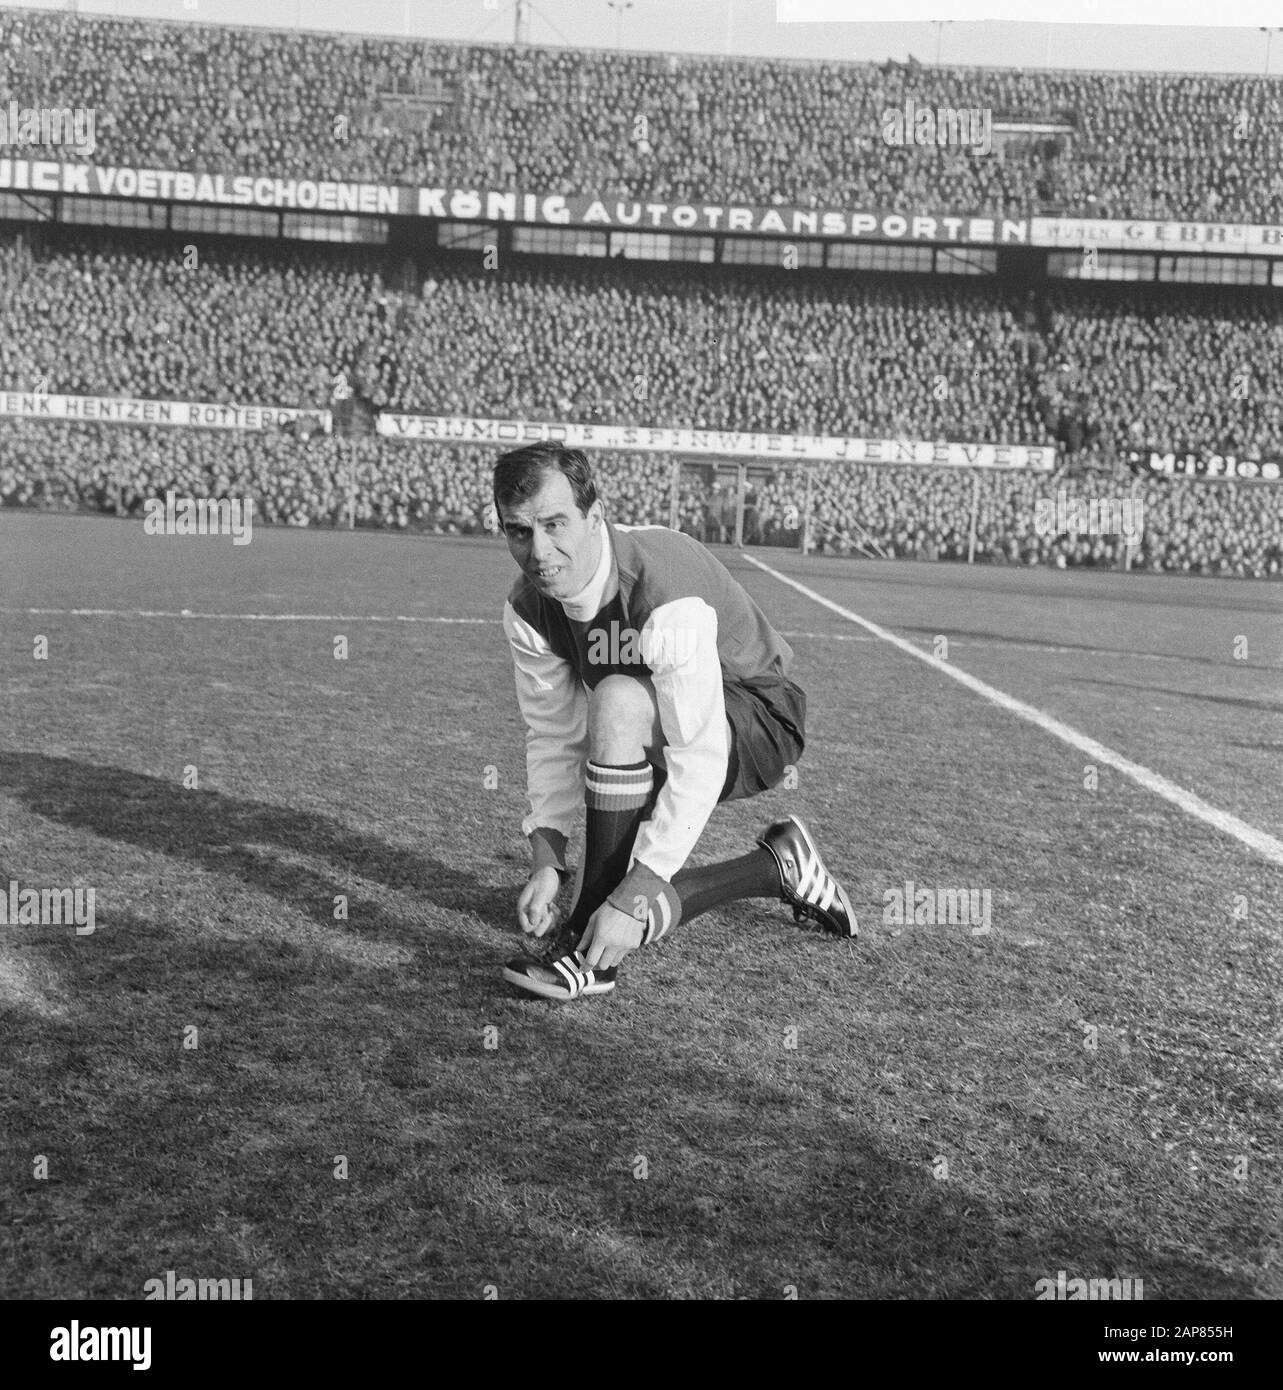 Feyenoord vs. Ajax 1-1 Description: Coen Moulijn strictly his laces Date: 9 January 1966 Location: Rotterdam, Zuid-Holland Keywords: sport, football Person name: Moulijn, Coen Institution name: Feyenoord Stock Photo